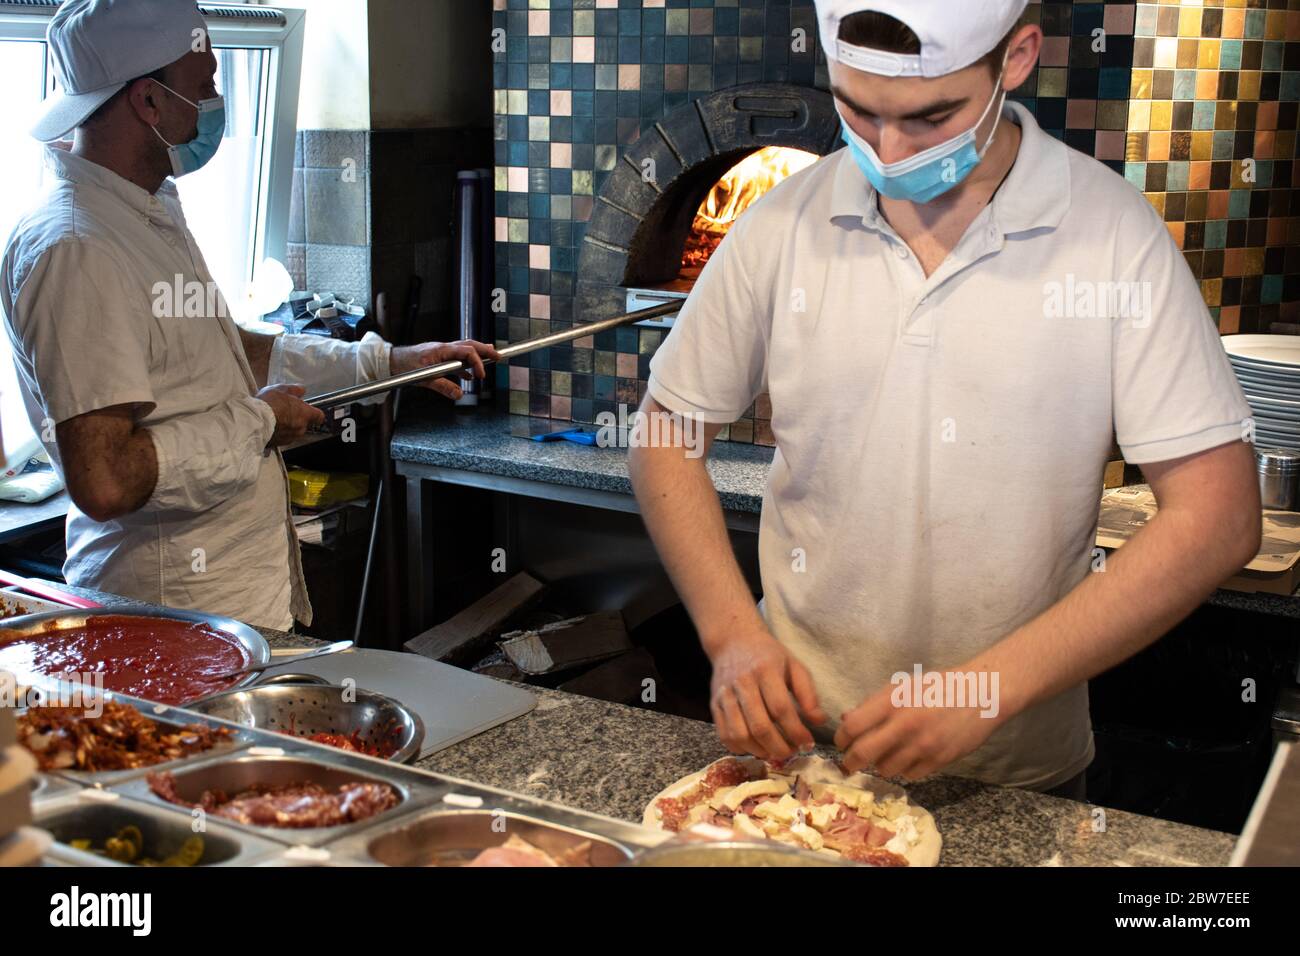 Chefs preparing pizza in a pizzeria wearing masks and protections during covid or coronavirus emergency, reopening pizzerias and restaurants Stock Photo